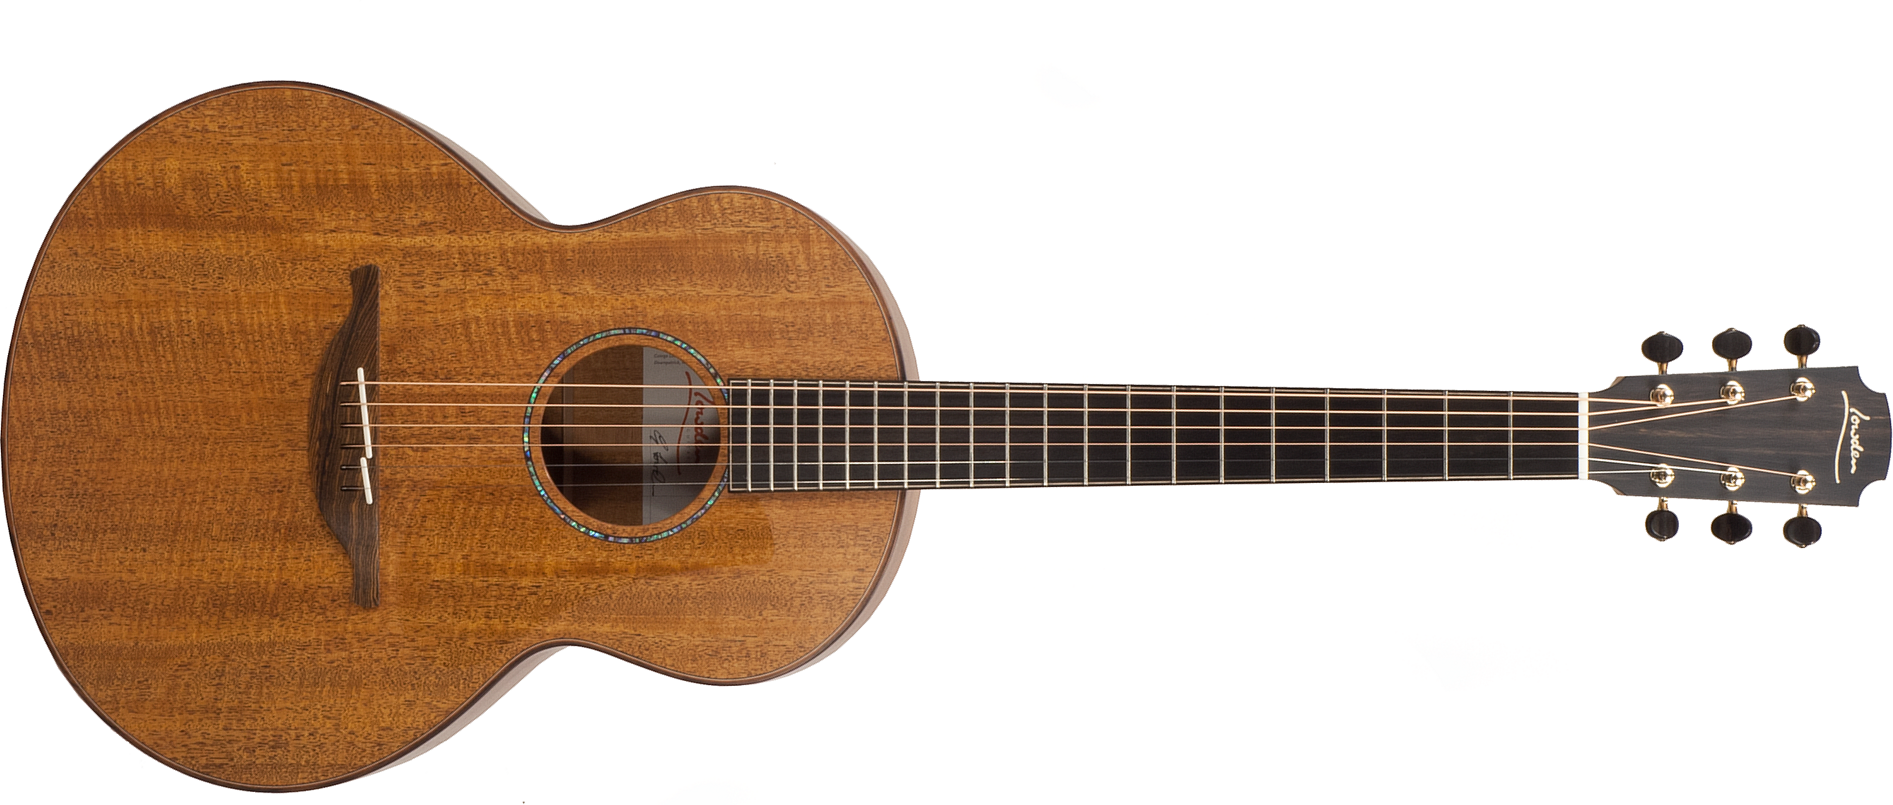 Lowden S35-m Orchestra Model Fiddleback Mahogany Tout Acajou - Natural - Acoustic guitar & electro - Main picture